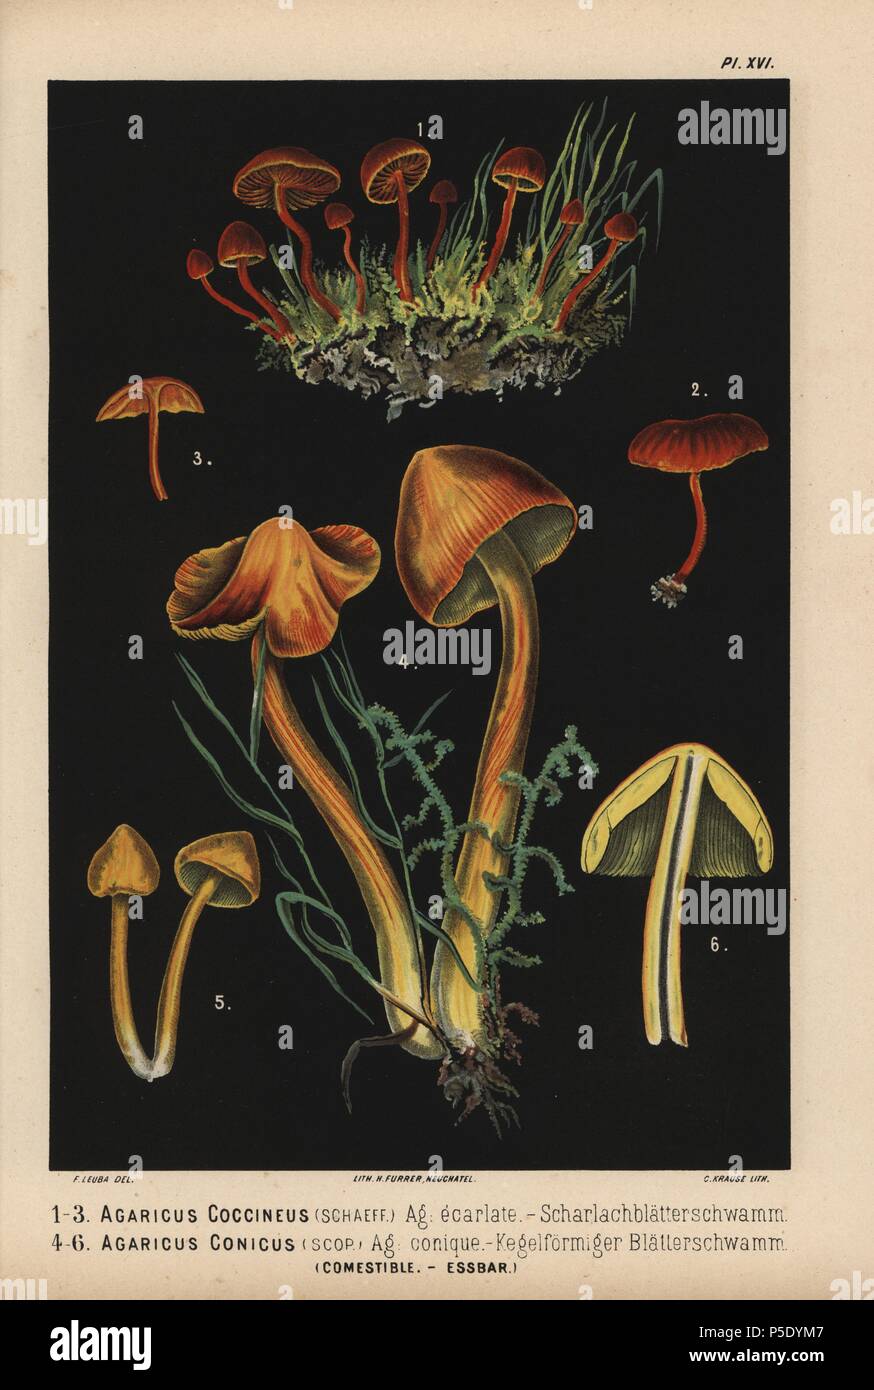 Scarlet hood, Hygrocybe coccinea, Agaricus coccineus, agaric ecarlate, and Witch's hat, Hygrocybe conica, Agaricus conicus, agaric conique, edible. Chromolithograph by C. Krause of an illustration by Fritz Leuba from 'Les champignons comestibles et les especes vénéneuses avec lesquelles ils pourraient etre confondus' (Edible mushrooms and the poisonous species they should not be confused with), Delachaux et Niestle, Neuchatel, Switzerland, 1890, lithographed by H. Furrer. Fritz Leuba (1848-1910) was a mycologist and artist from Neuchatel, Switzerland. Stock Photo